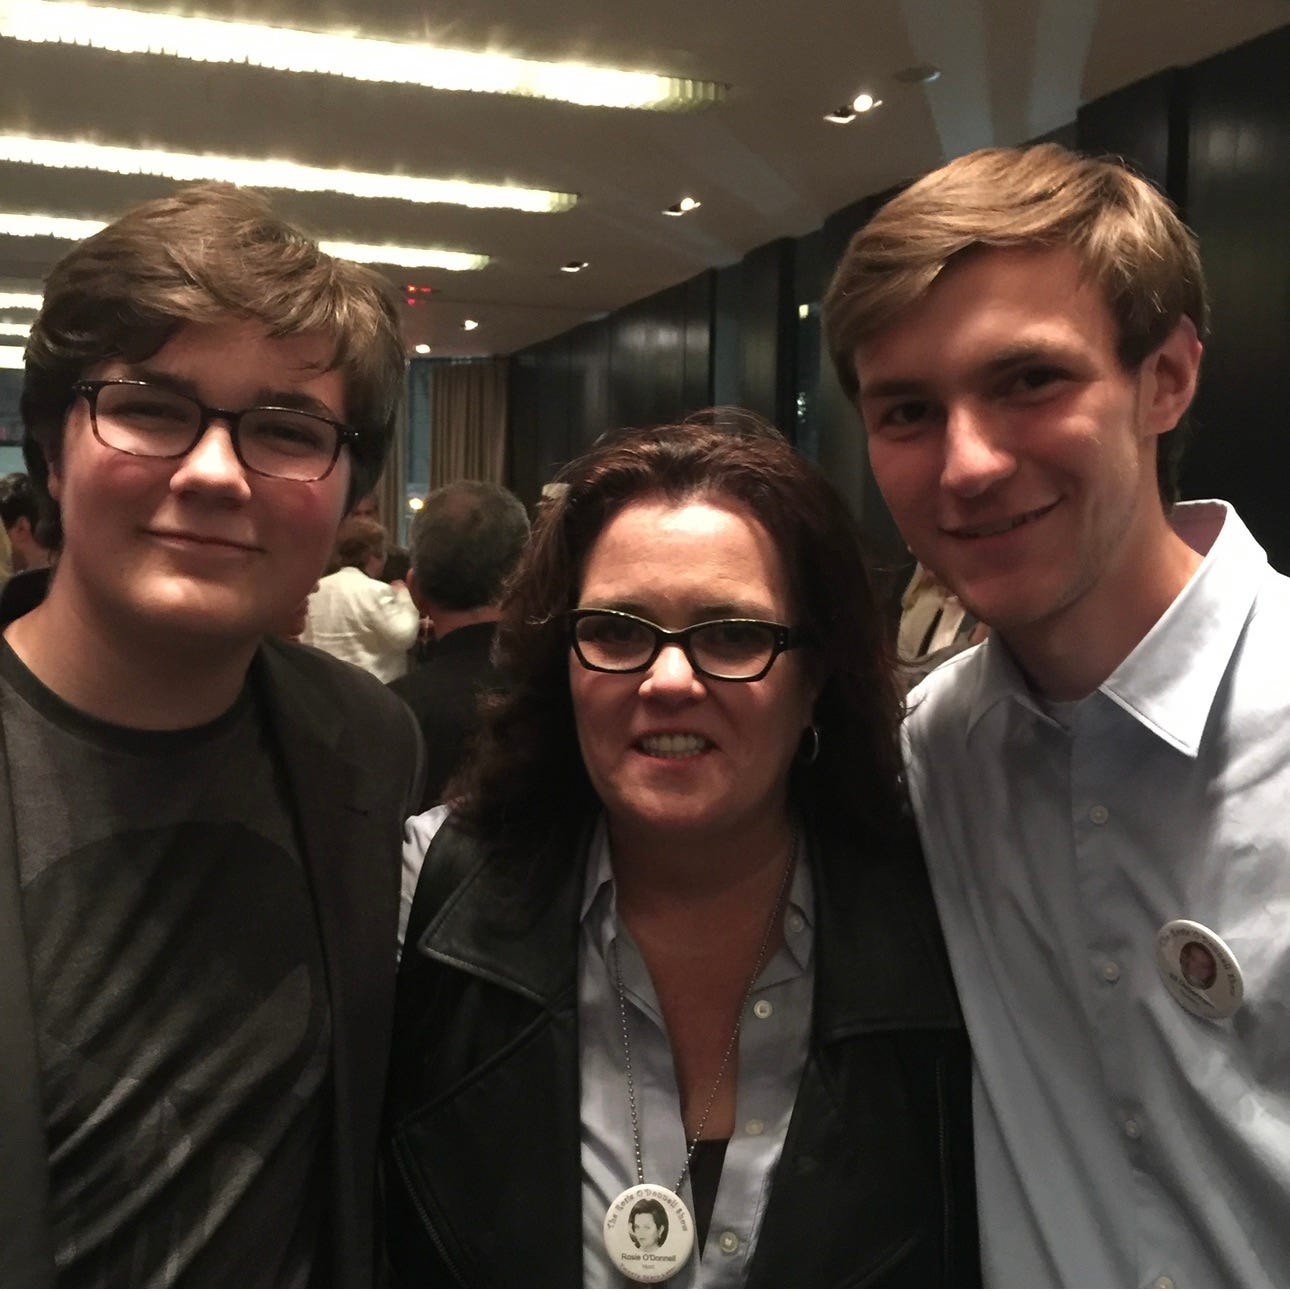 Lincoln Debenham, Rosie O'Donnell & Eli Debenham at the Rosie O'Donnell Show reunion in 2016, because Caissie couldn't find a pic of her & Rosie together